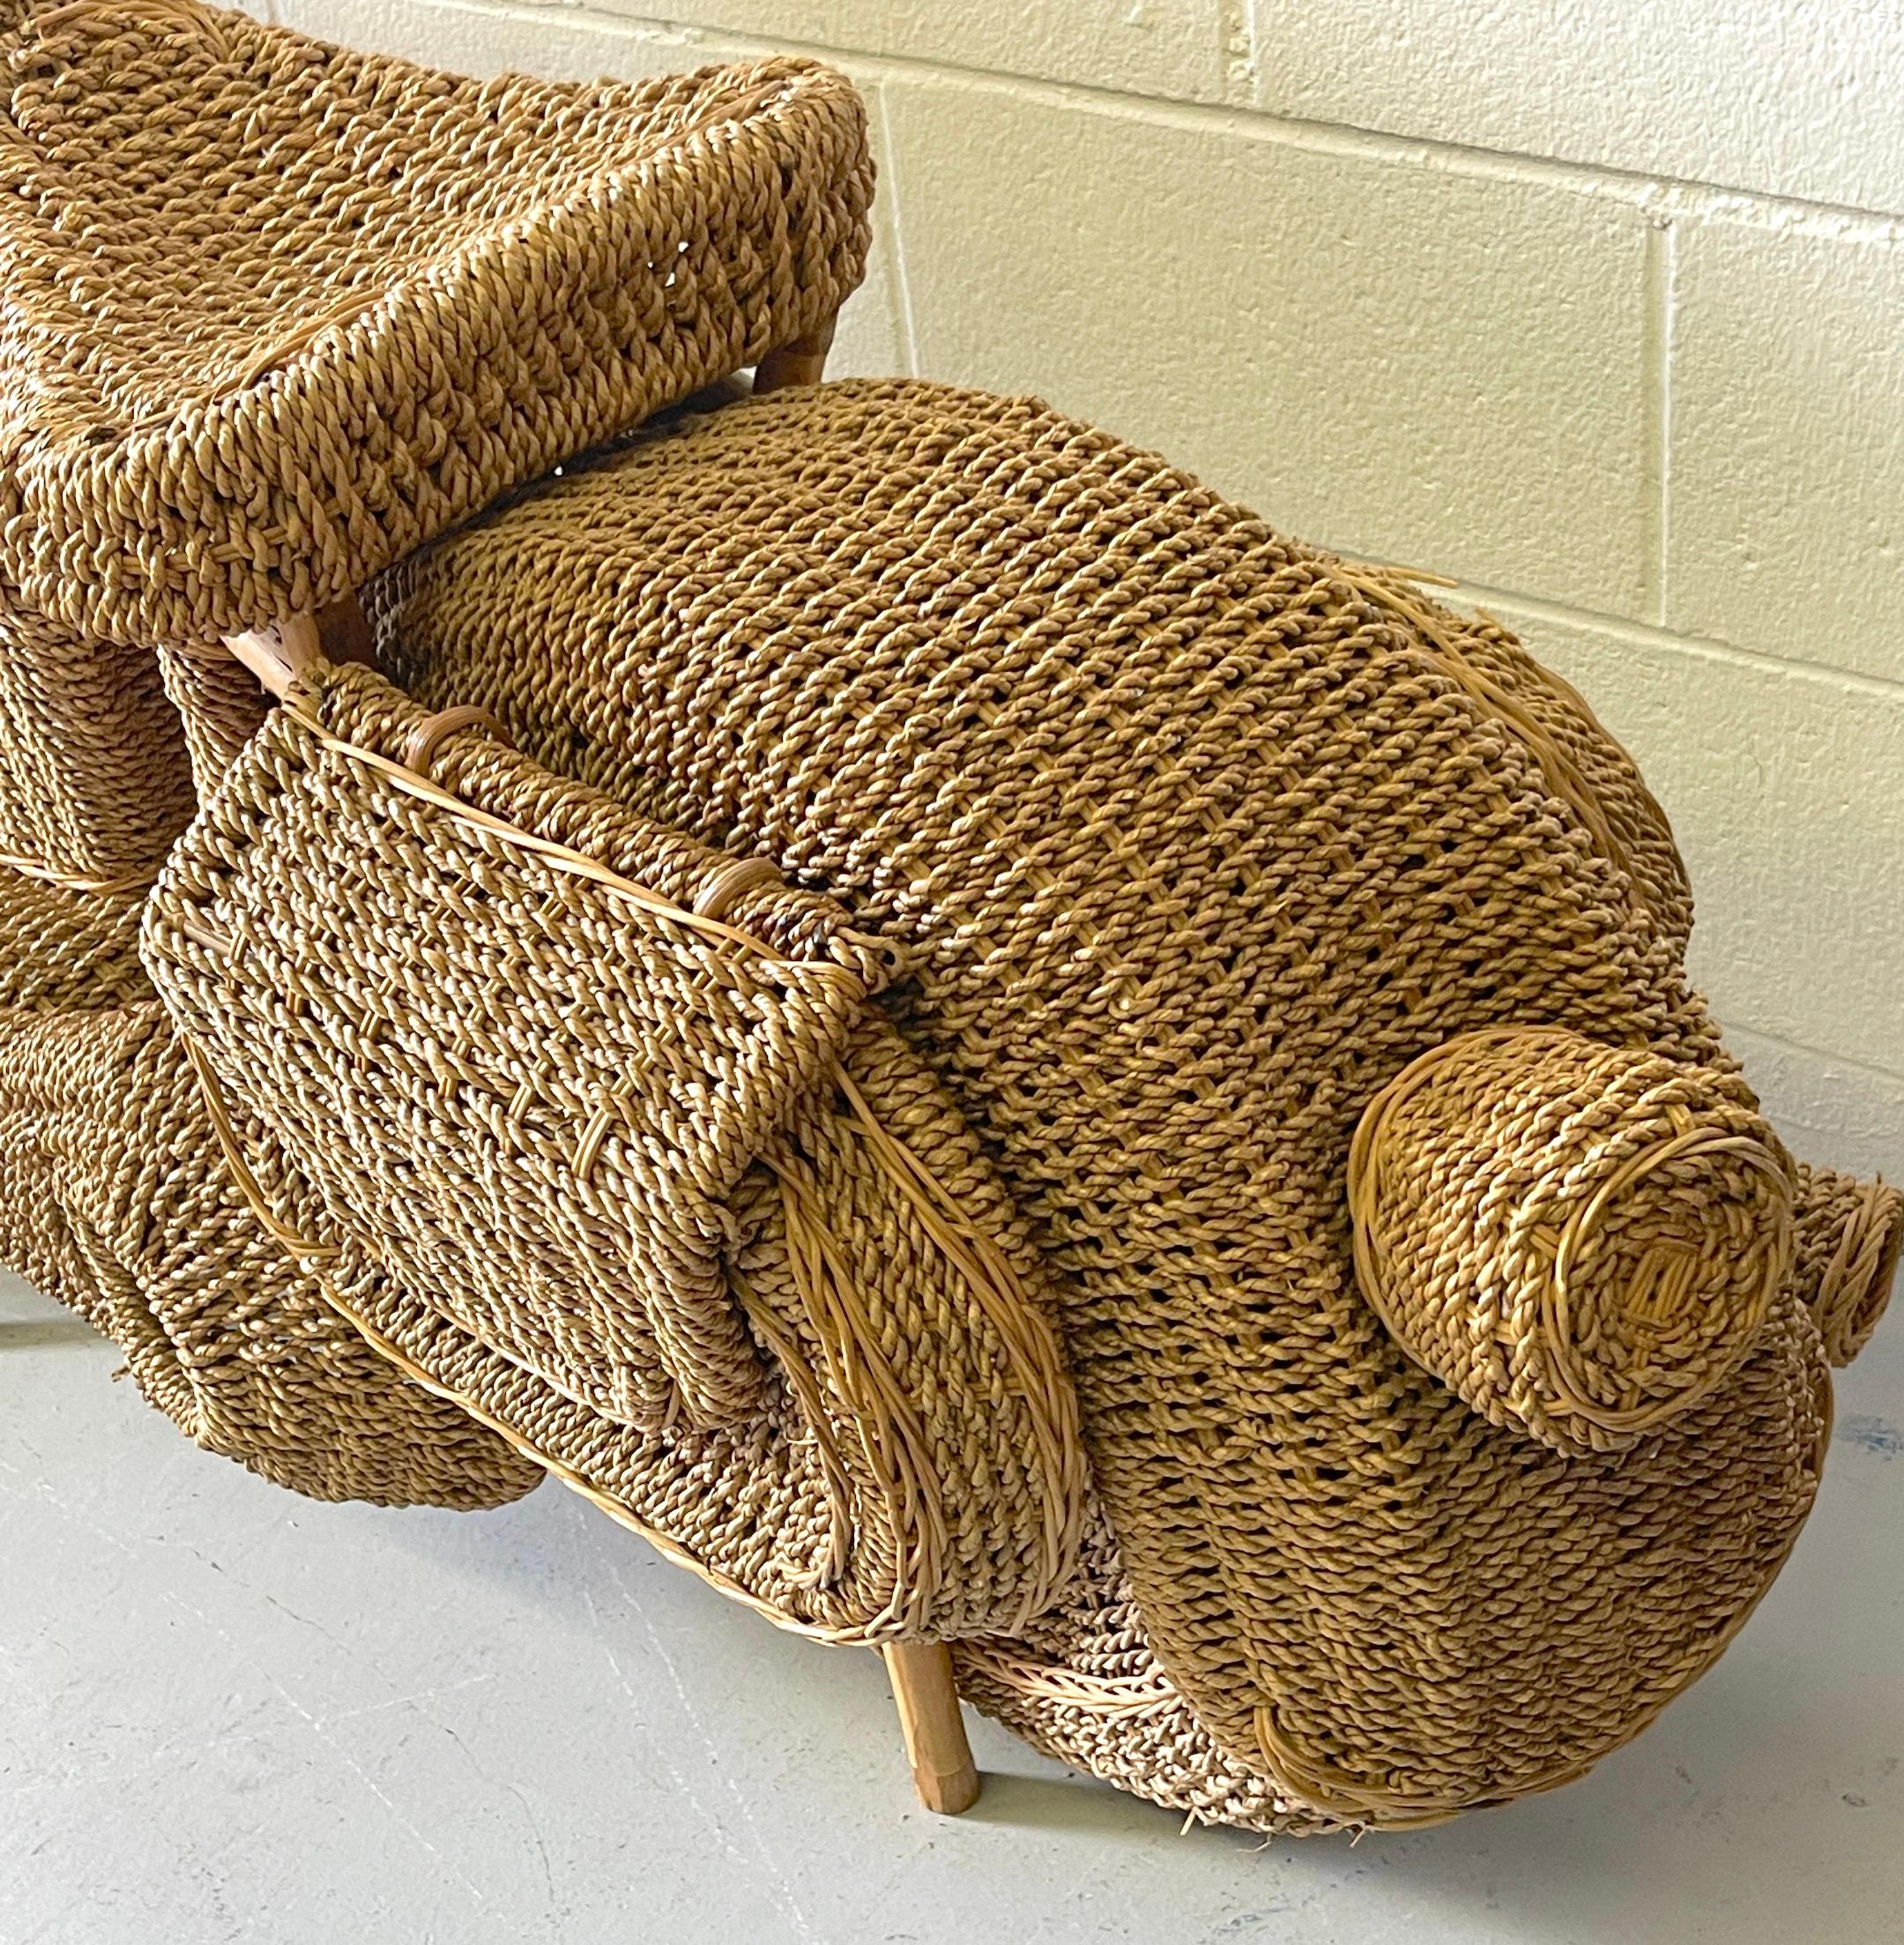 Life Size Harley Davidson Rattan Model of a Motorcycle, Attributed to Tom Dixon For Sale 3